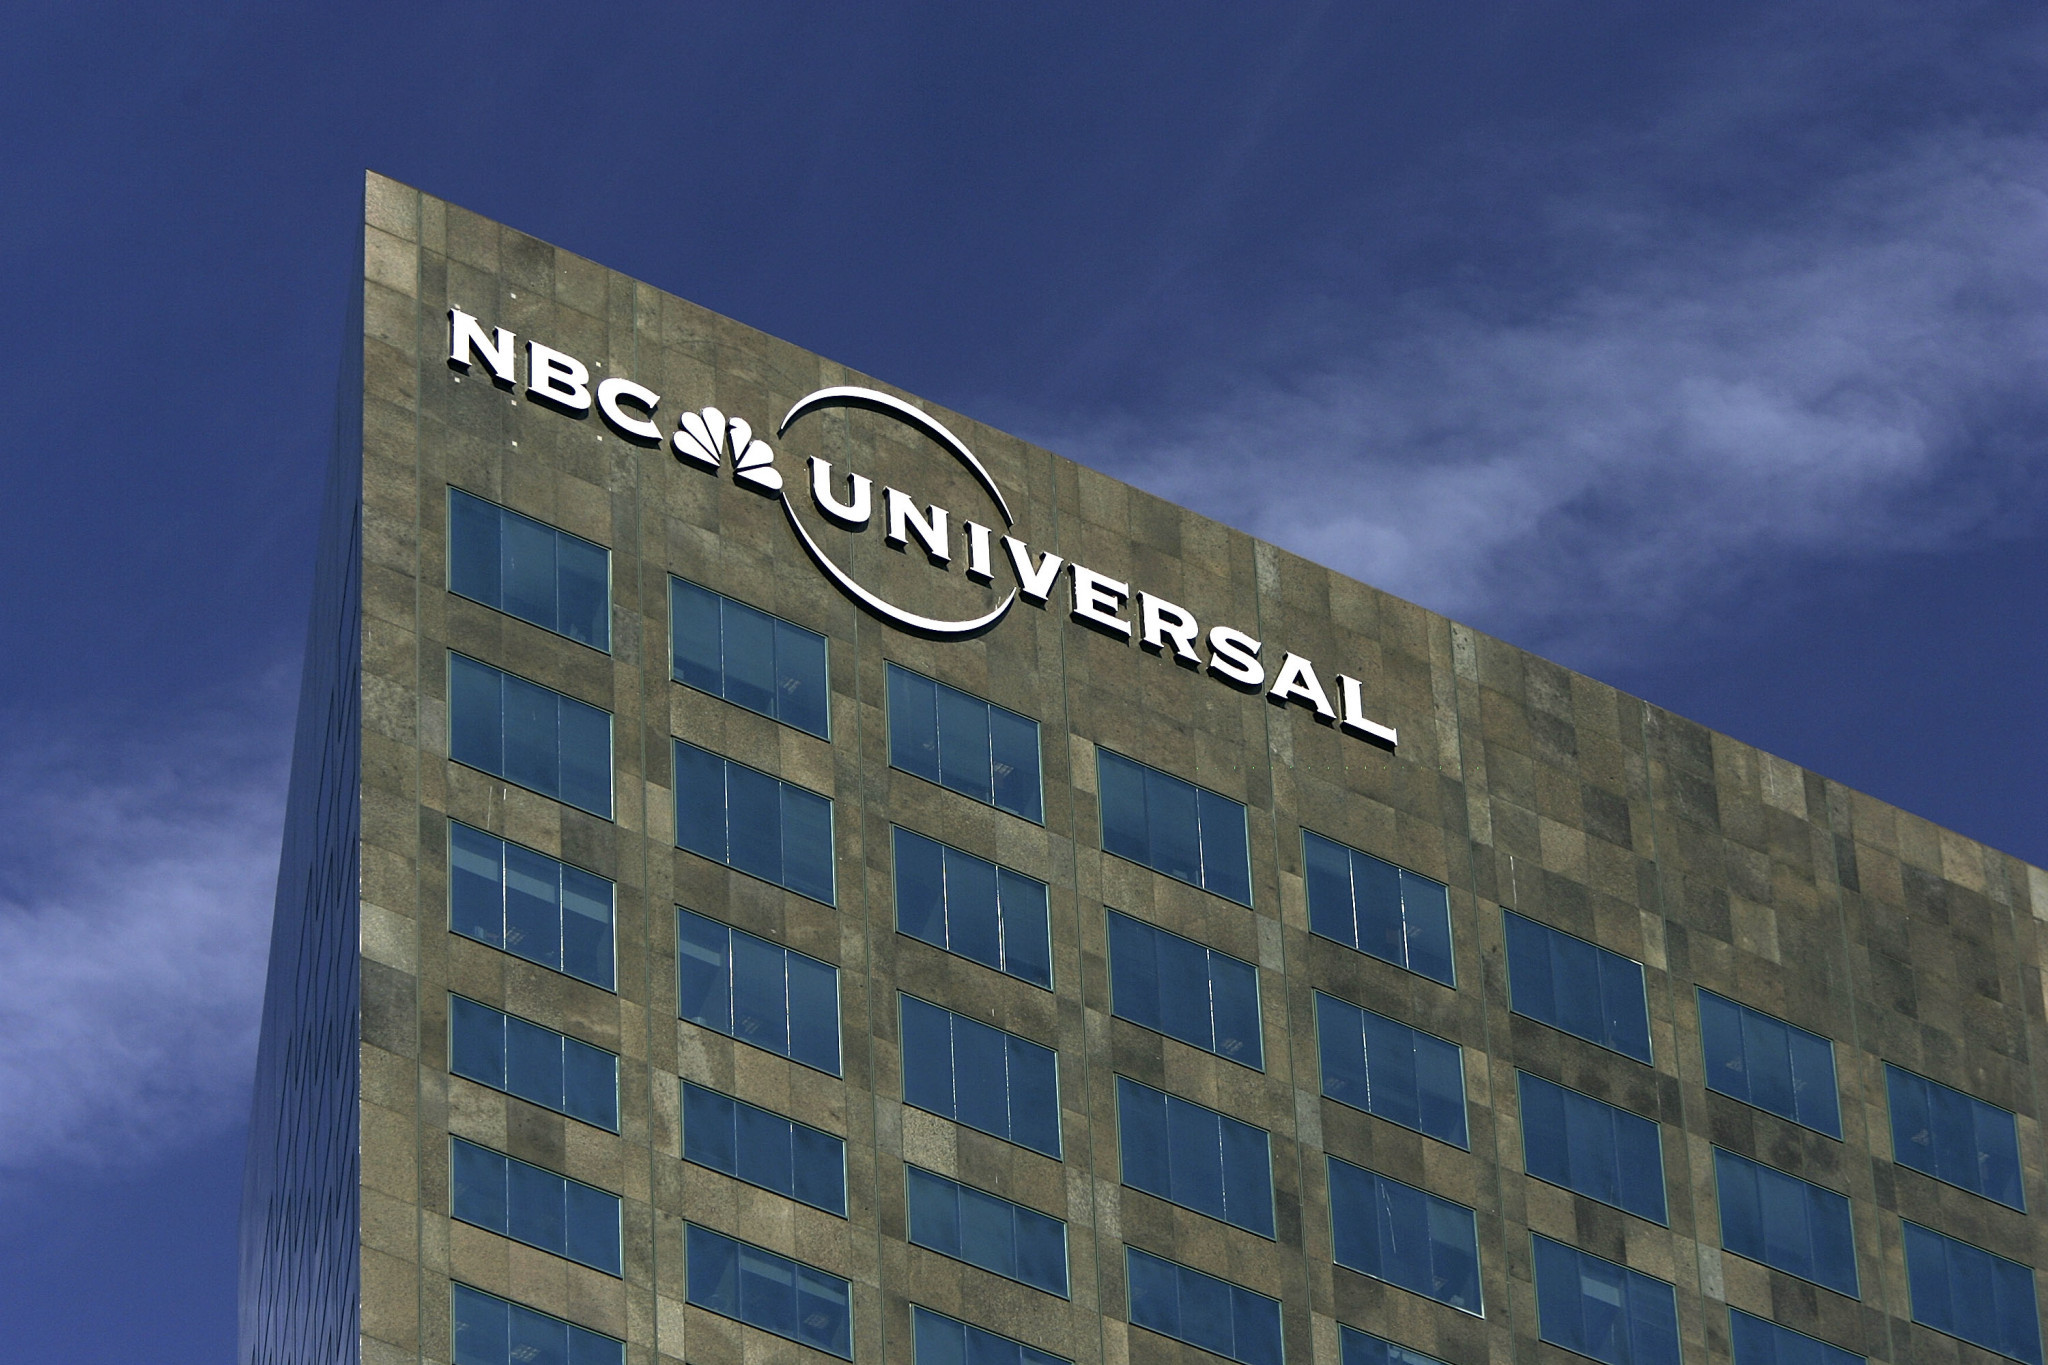 Olympic broadcaster NBCUniversal suffers advertising decline with sports programme disrupted